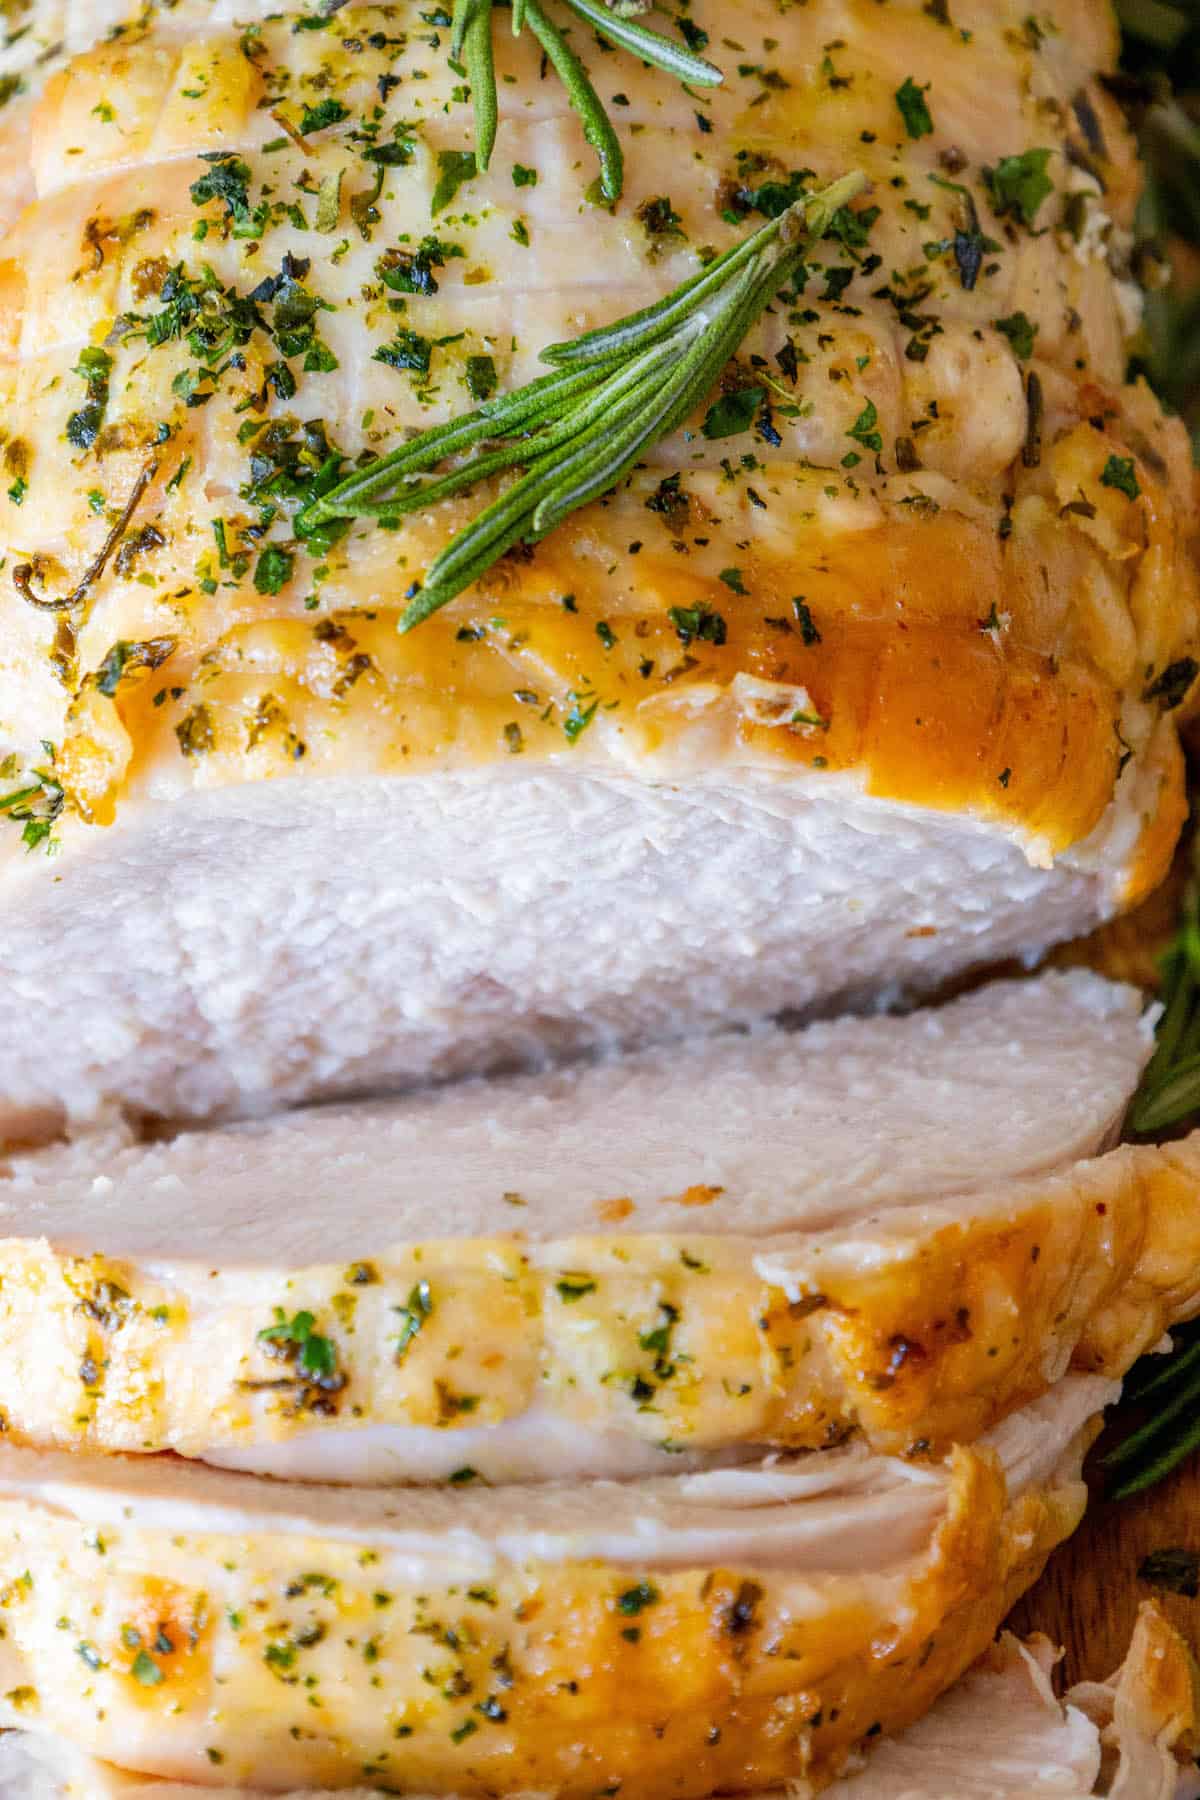 A close up of a roasted turkey breast with rosemary sprigs.